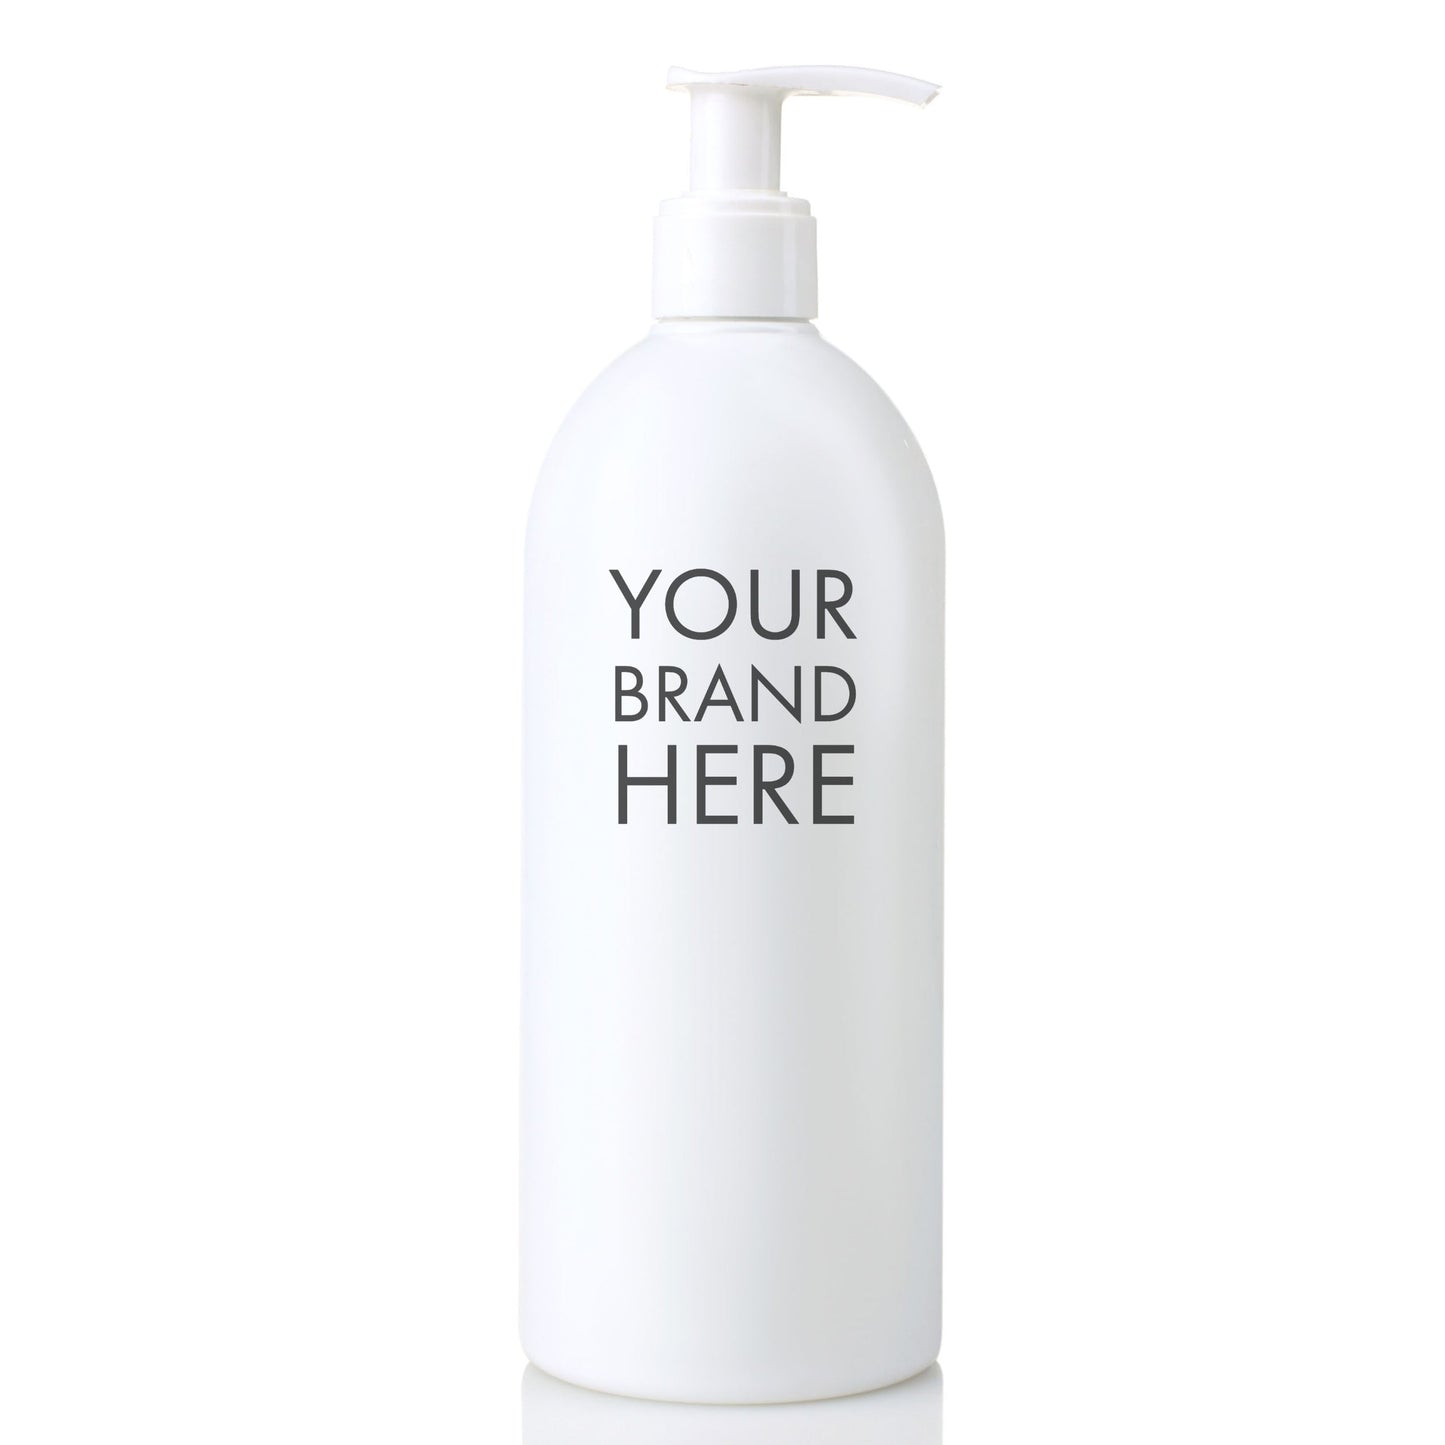 Deep Cleansing Lotion